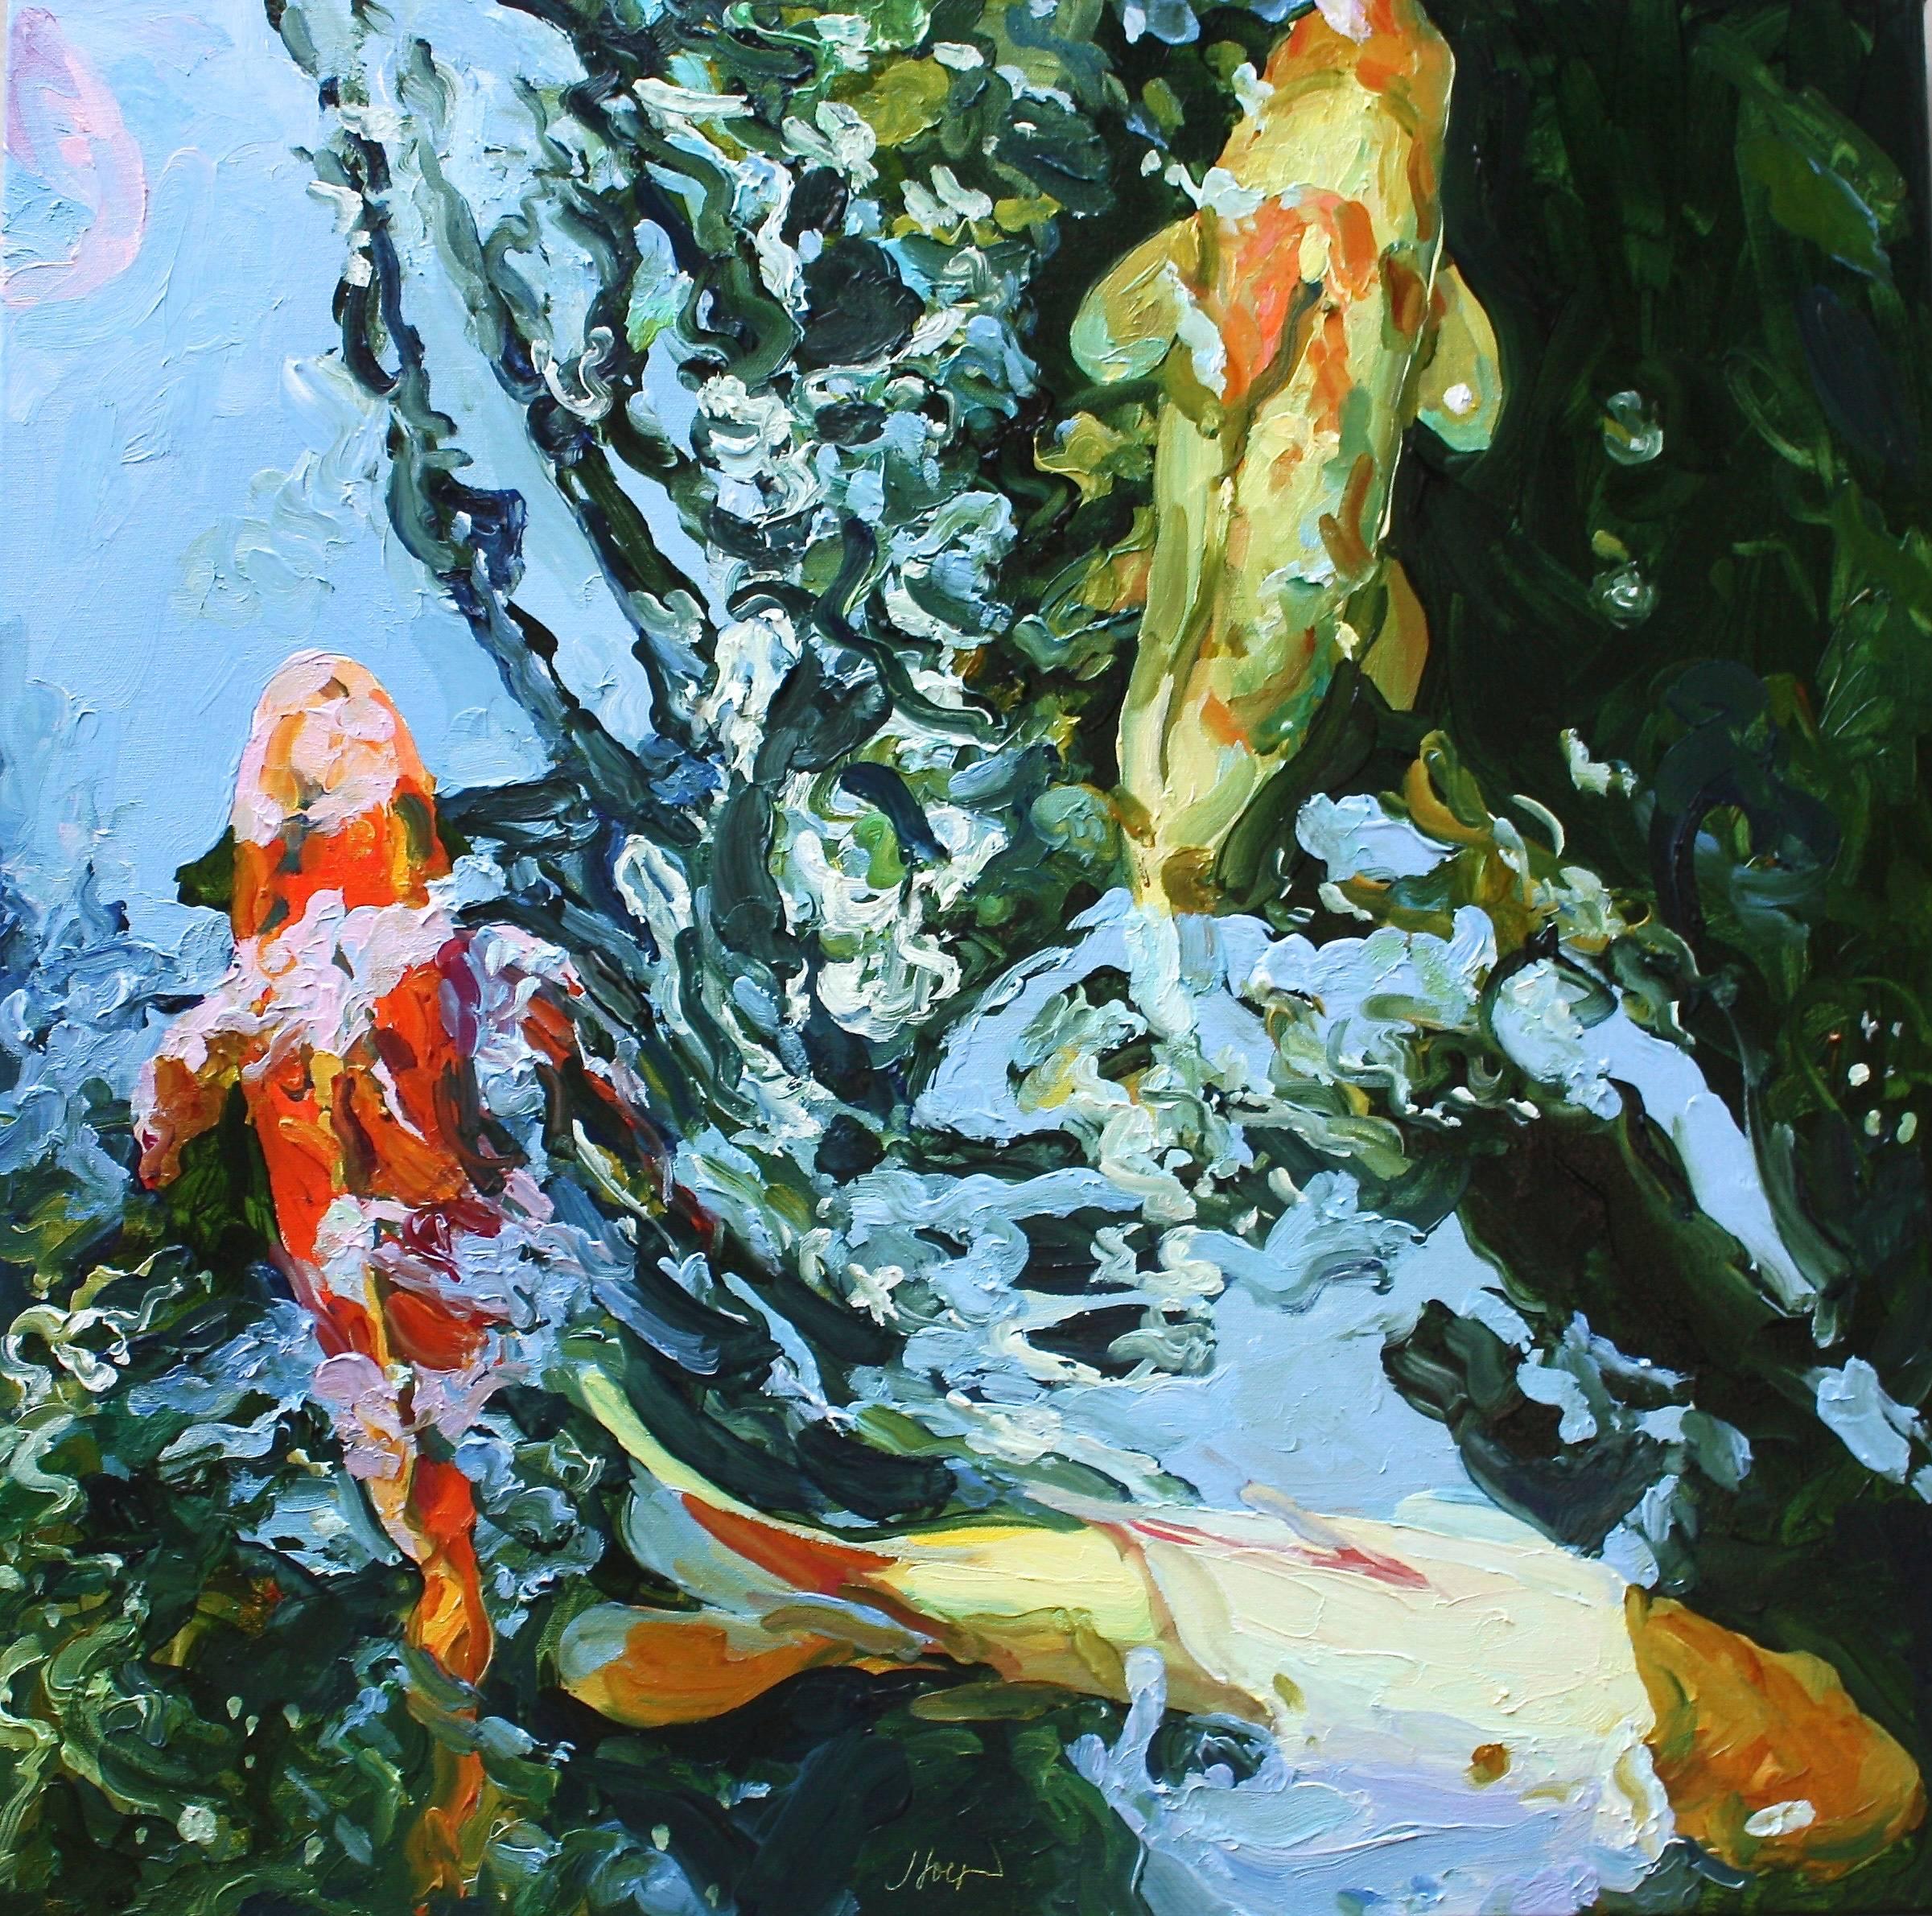 Square Koi 7 - Painting by Linda Holt